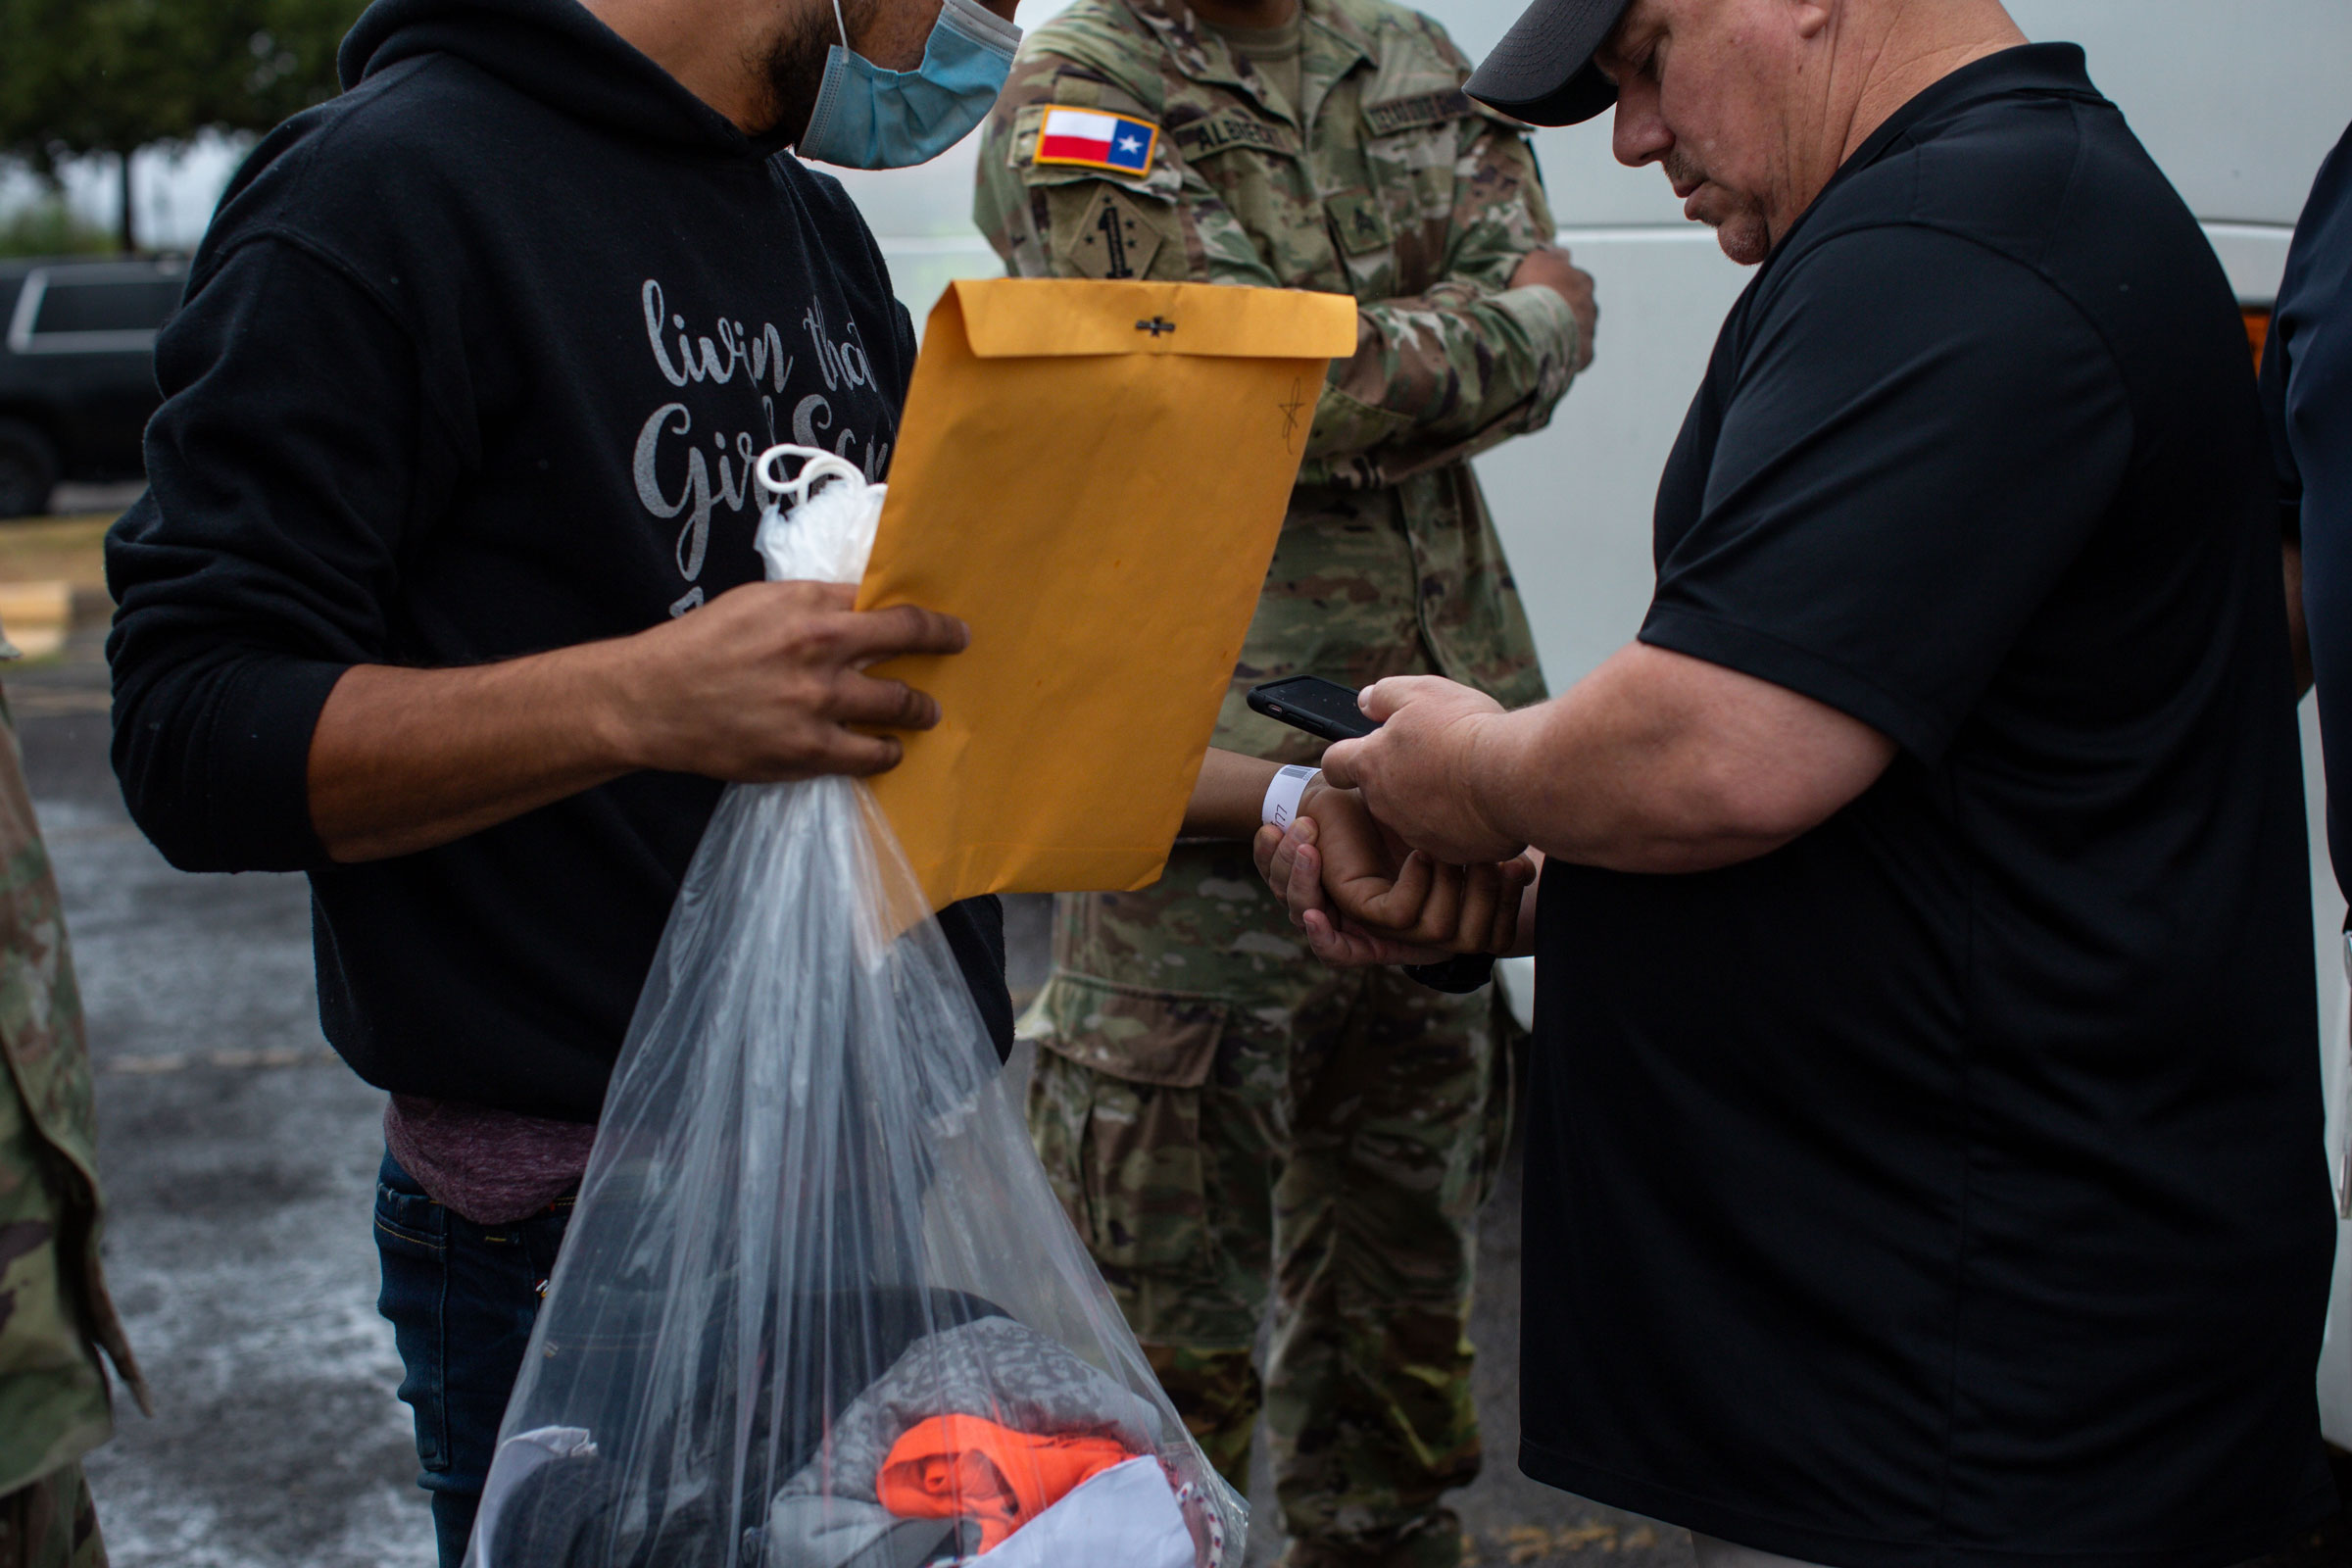 An official scans Jhason's assigned barcoded wristband required to travel on an Operation Lone Star bus to either Washington, D.C. or New York, New York, from the Val Verde Border Humanitarian Coalition in Del Rio, Texas, on Aug. 15, 2022. (Kaylee Greenlee Beal for TIME)